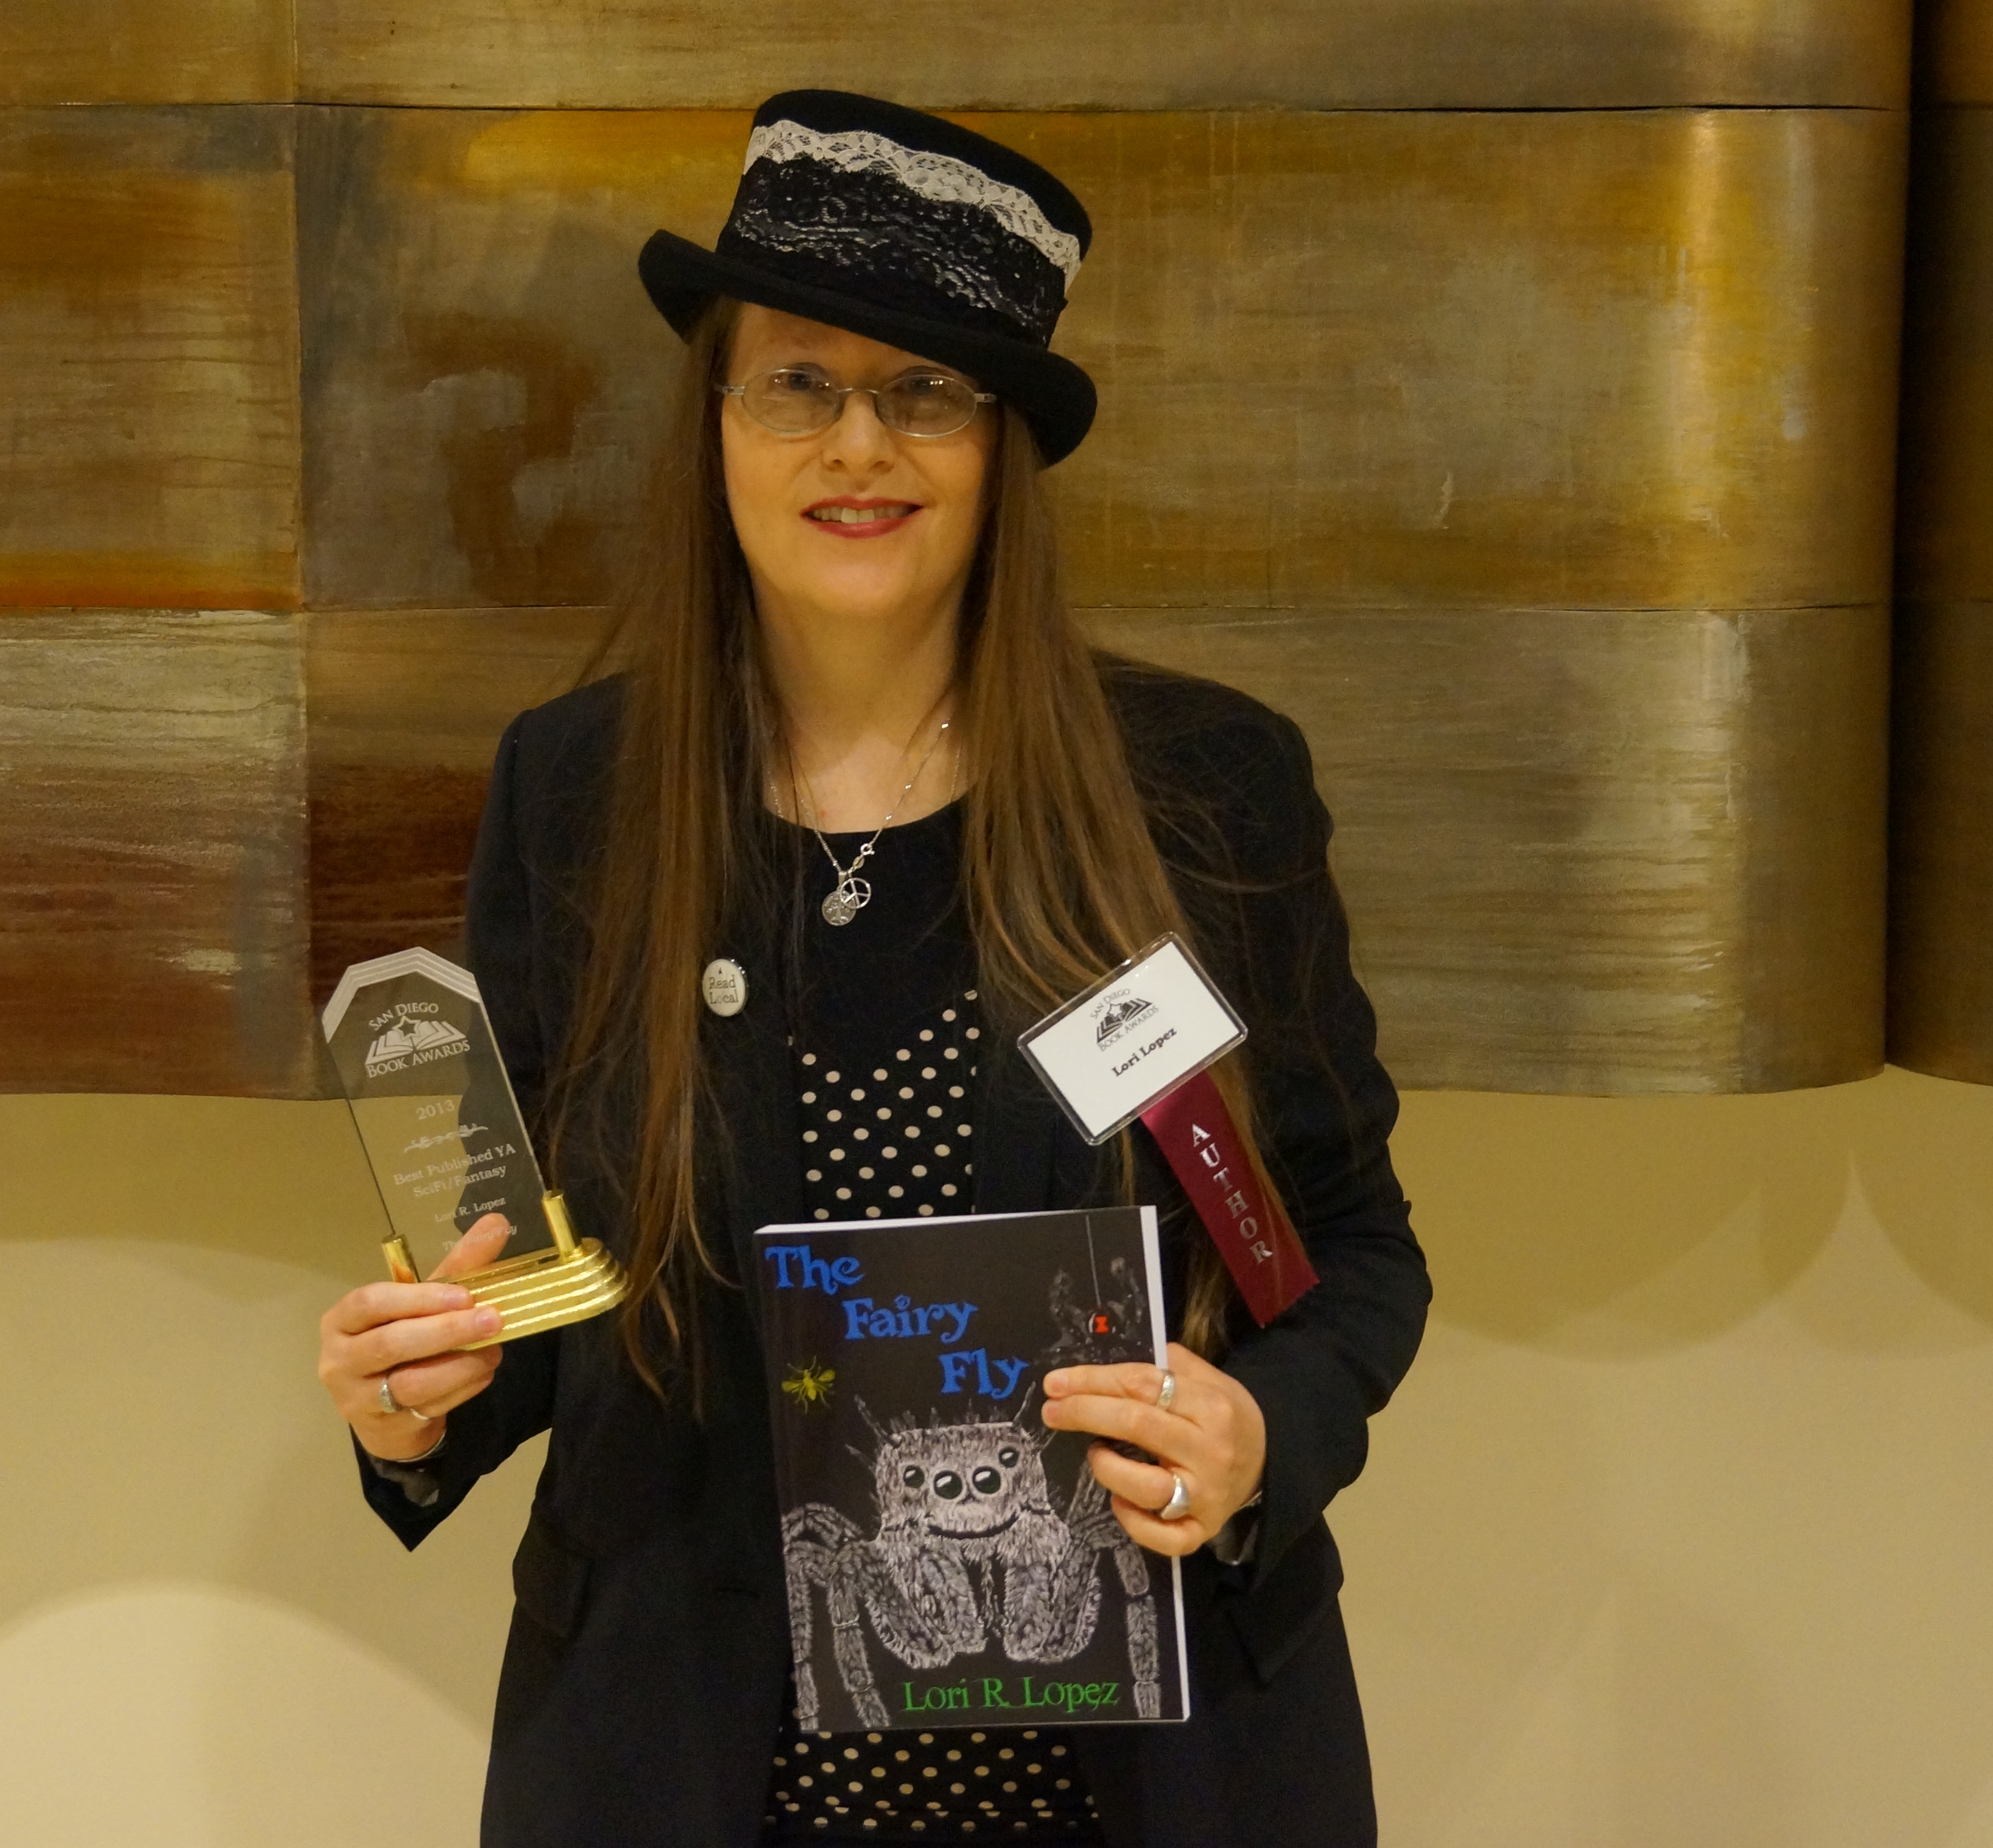 Lori R. Lopez with one of the awards she has received for her writing: 2014 Best Published YA SciFi/Fantasy for THE FAIRY FLY from the San Diego Book Awards.